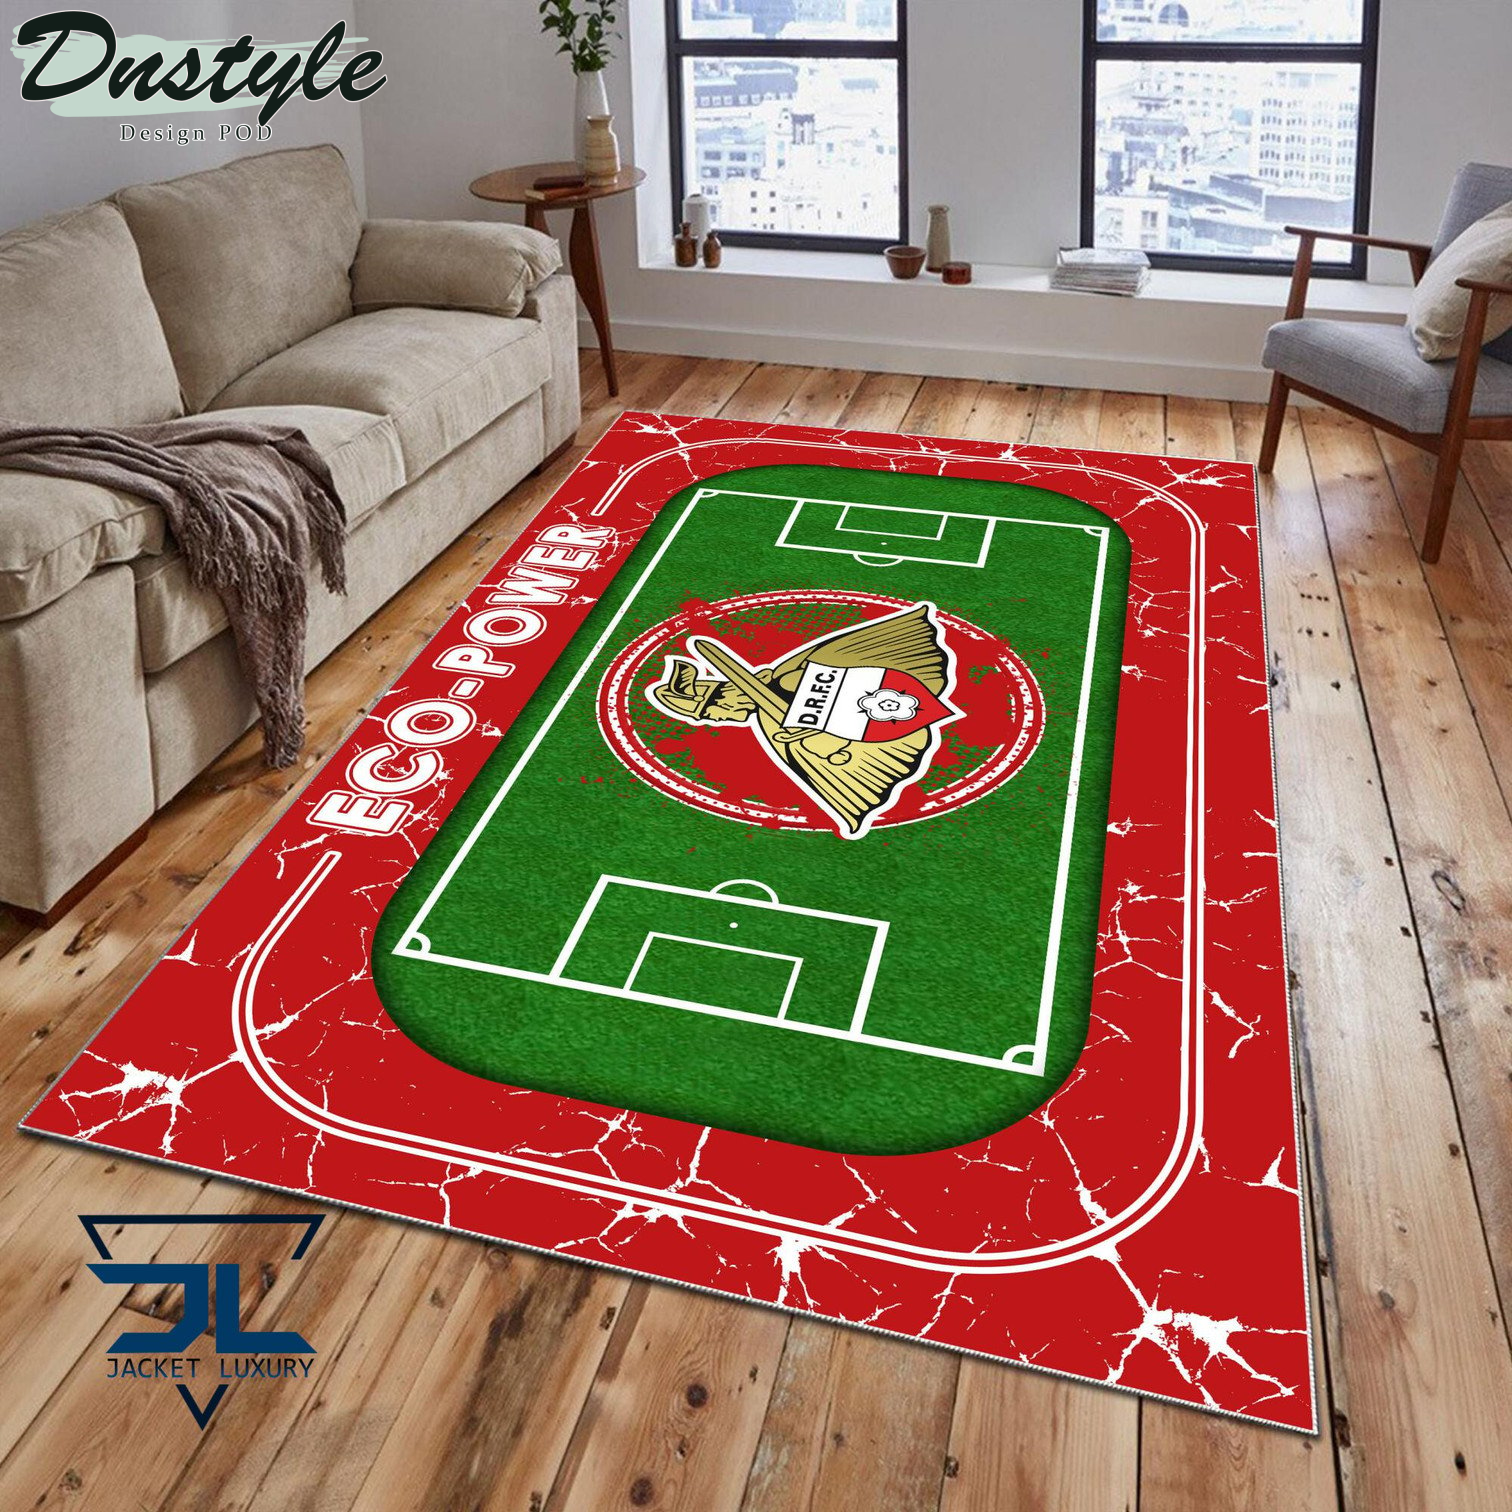 Doncaster Rovers Rug Carpet